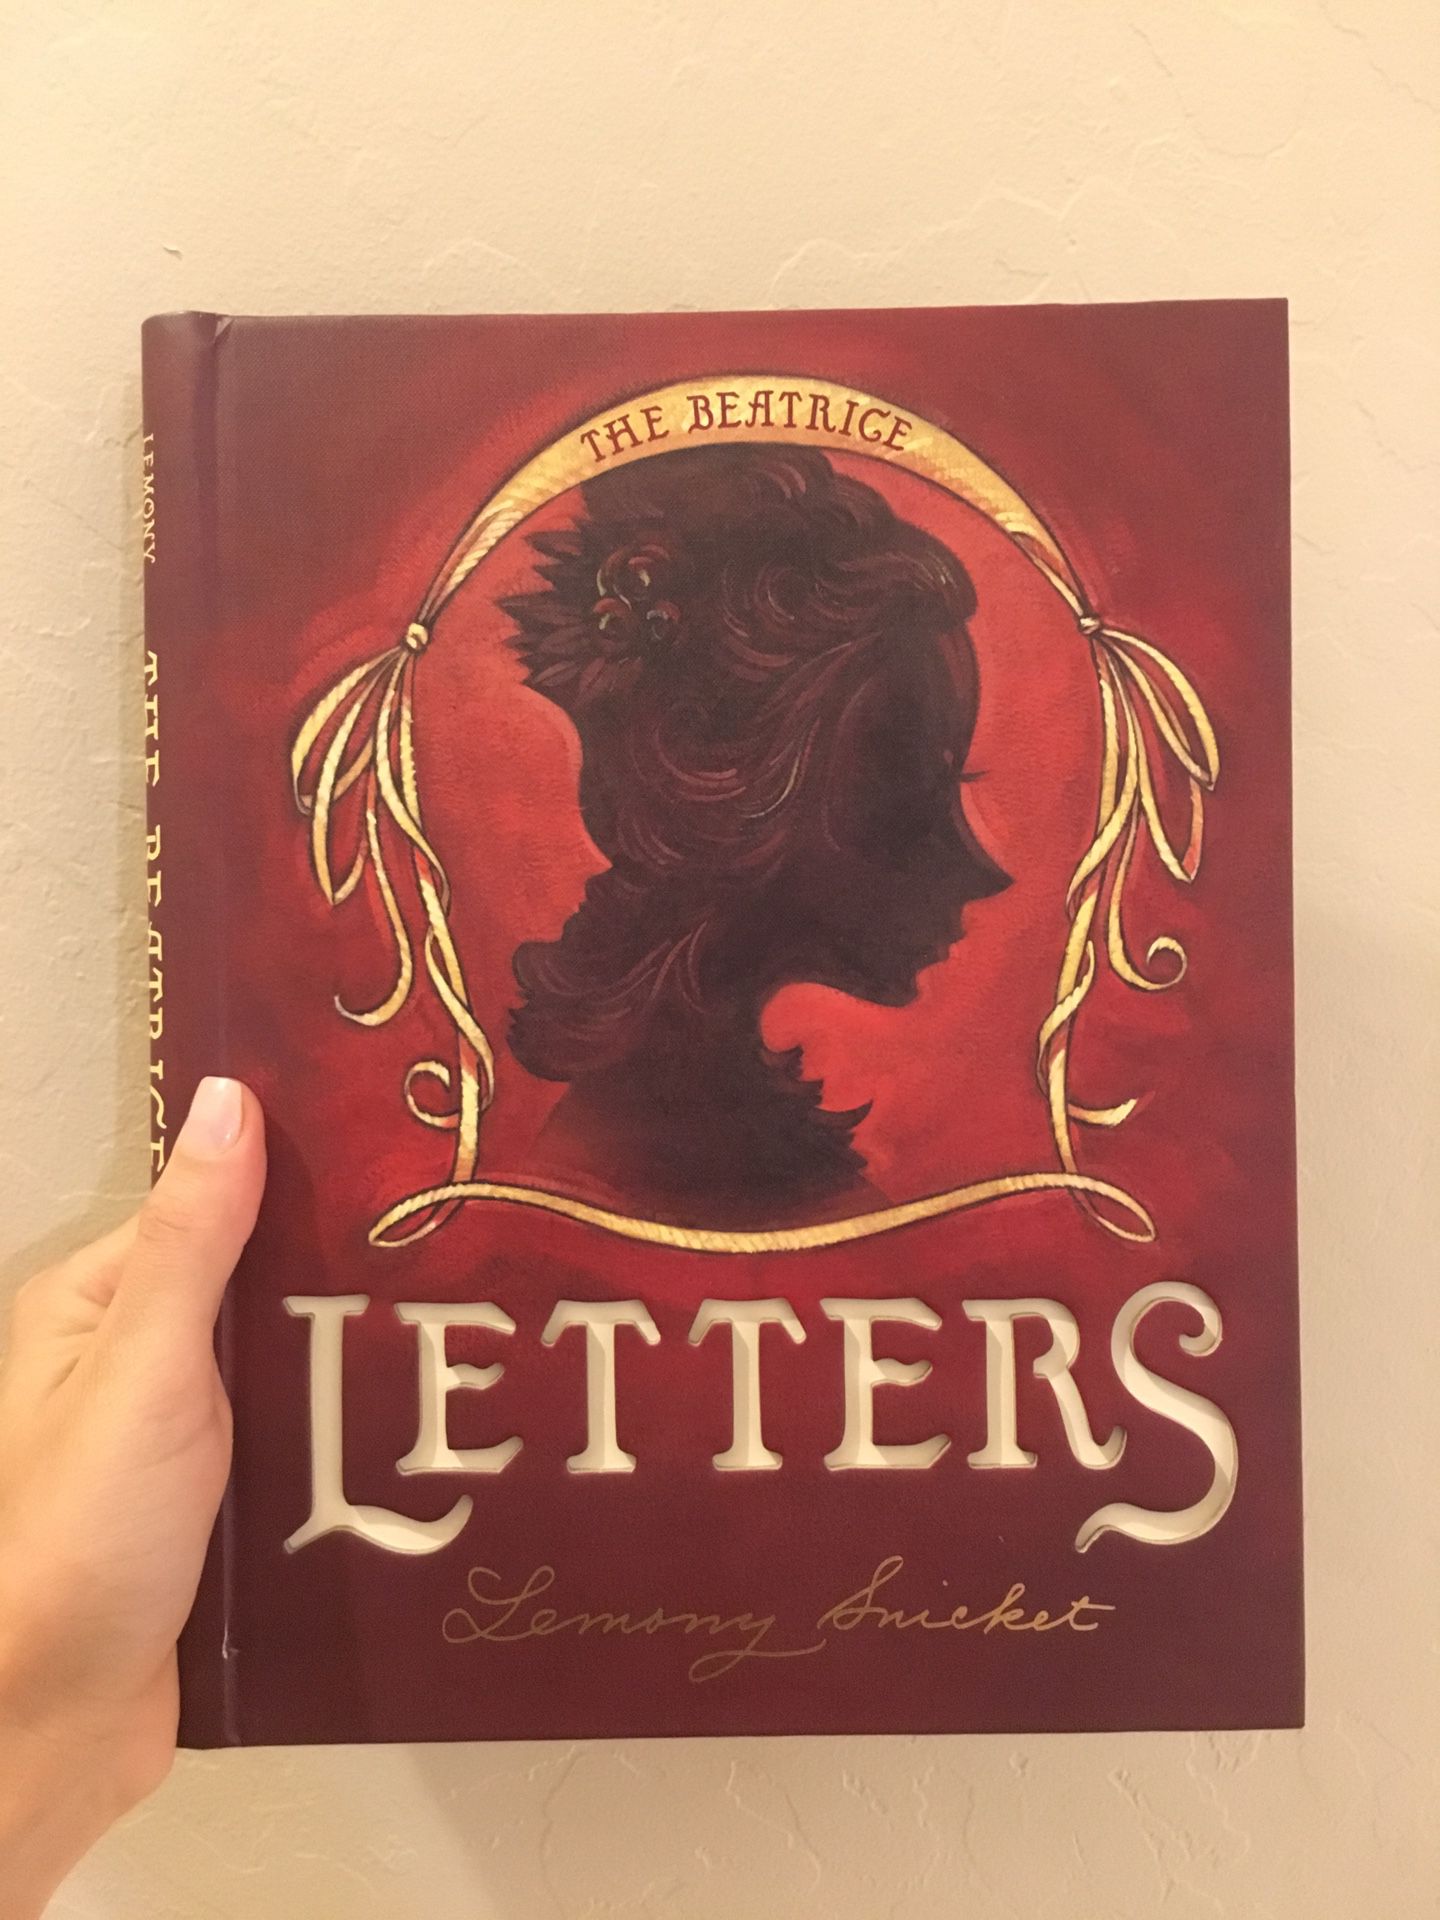 Lemony Snicket- The Beatrice Letters- Mysterious Story for Kids